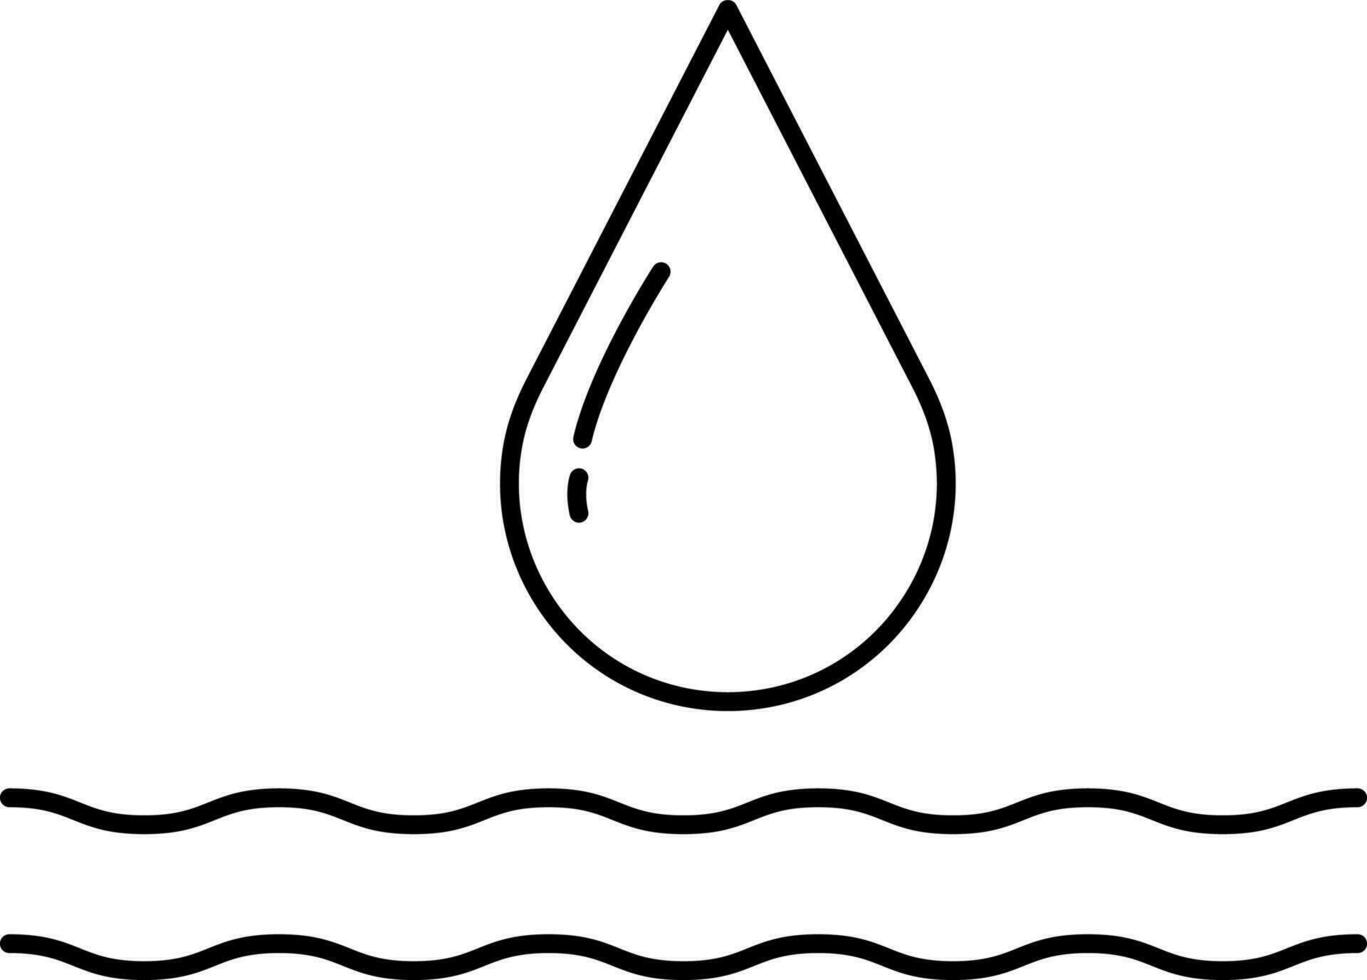 Drop With Wave Icon In Black Linear Style. vector